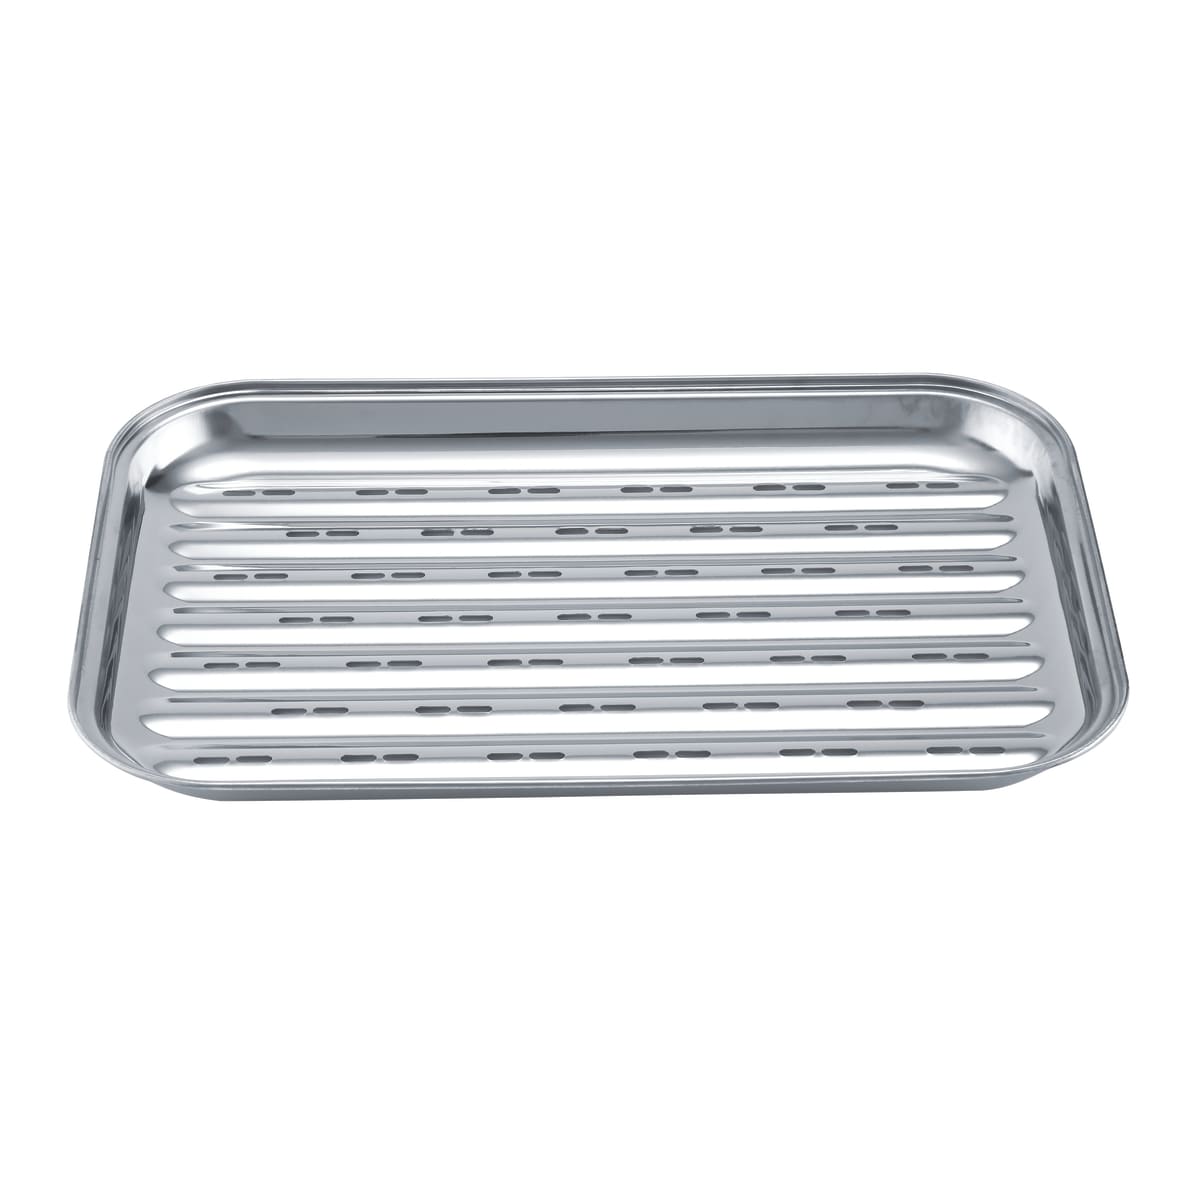 NATERIAL STAINLESS STEEL FOOD TRAY 33X25CM